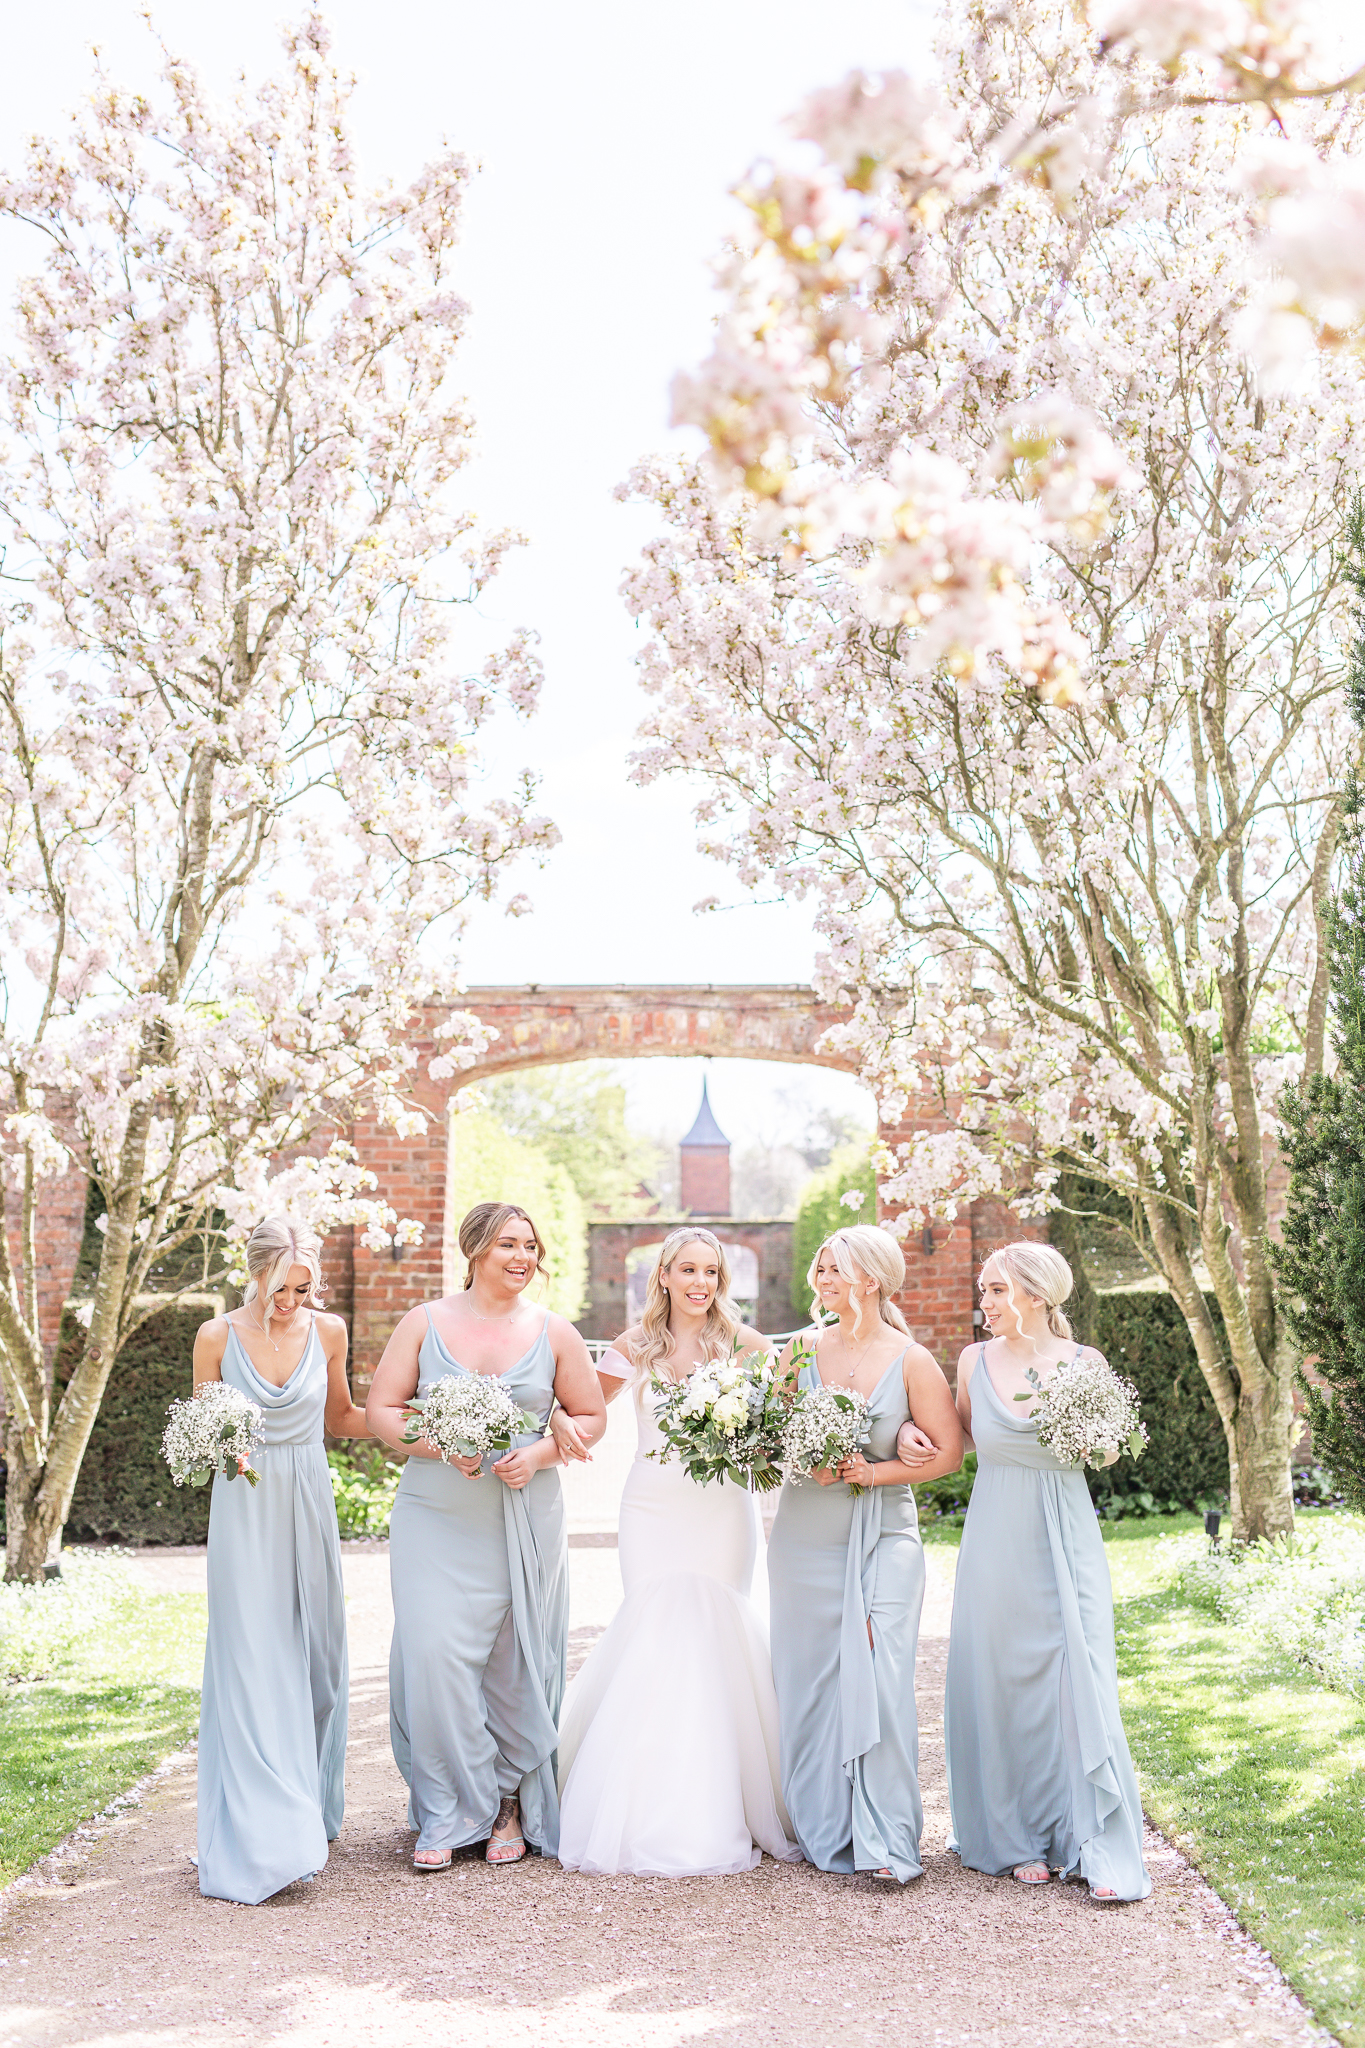 Kelsey and her bridesmaids walking in the grounds at Combermere Abbey in Cheshire, taken by wedding photographer Sophie Siddons